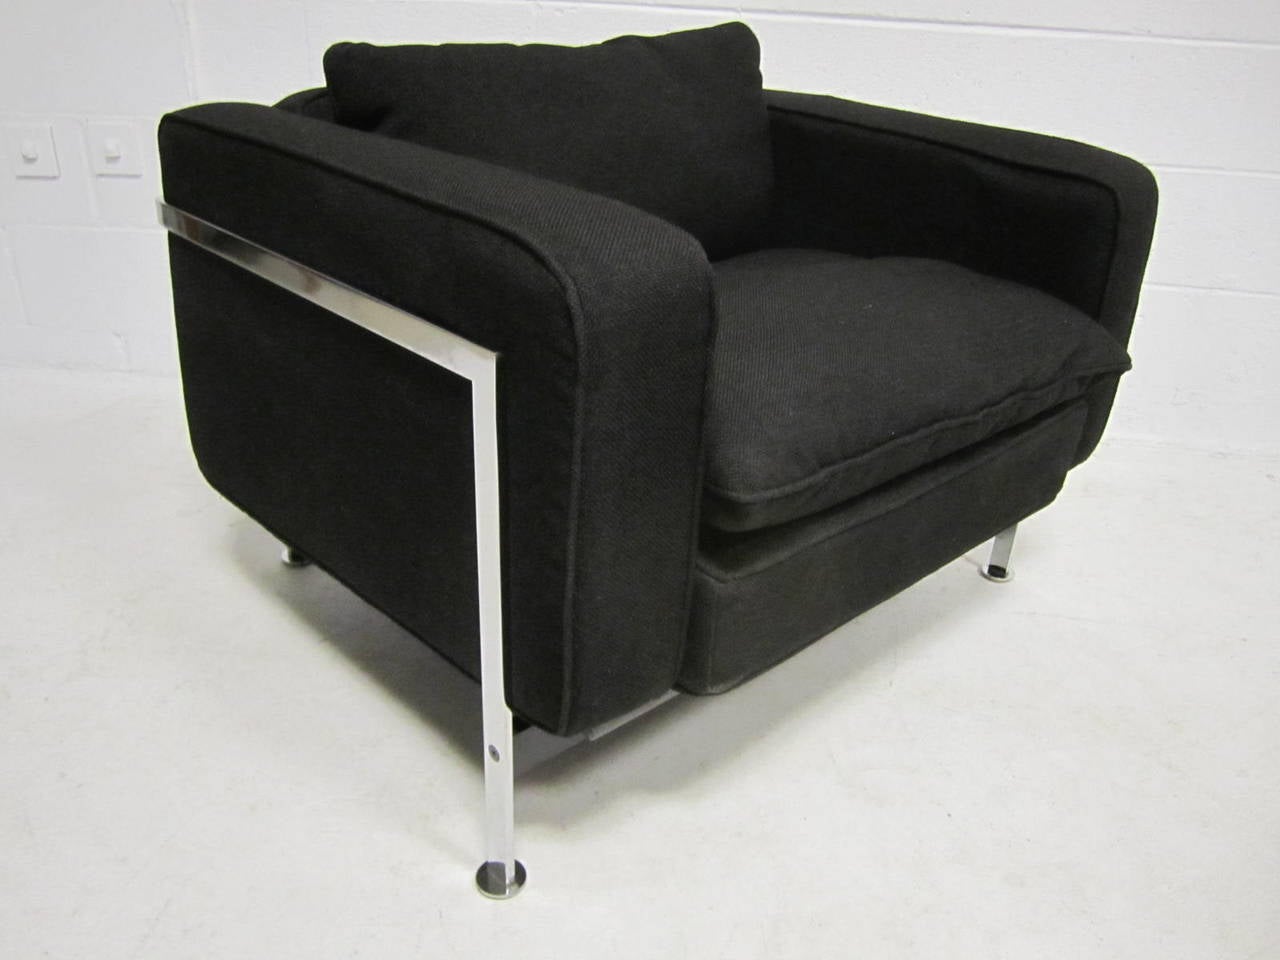 Robert Haussmann for Stendig, upholstery and steel lounge chair.
Haussmann inspired by LeCorbusier 